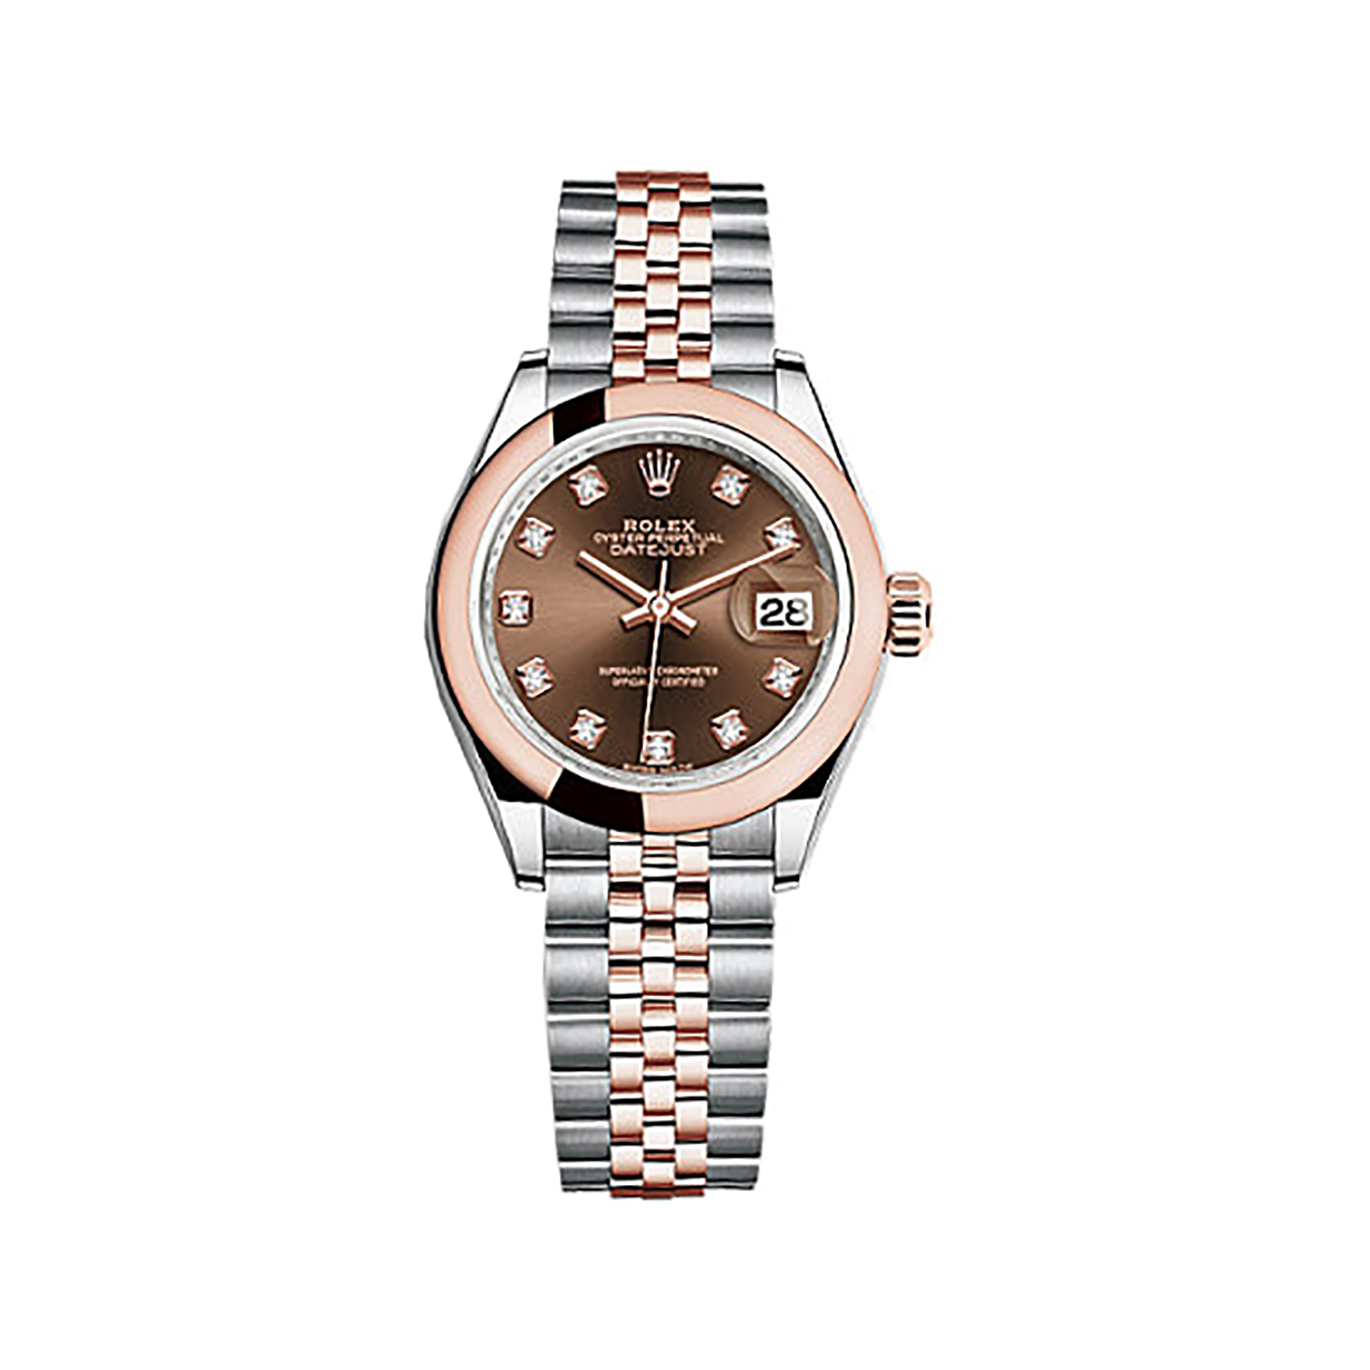 Lady-Datejust 28 279161 Rose Gold & Stainless Steel Watch (Chocolate Set with Diamonds)